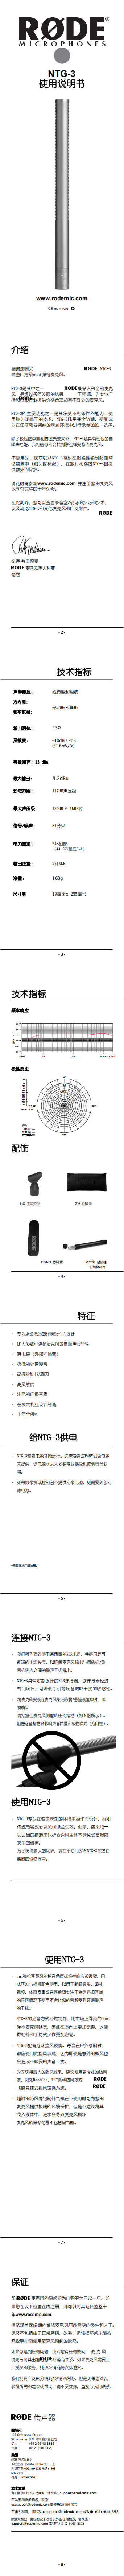 NTG3_product_manual_1_8_translate_Chinese_0.png